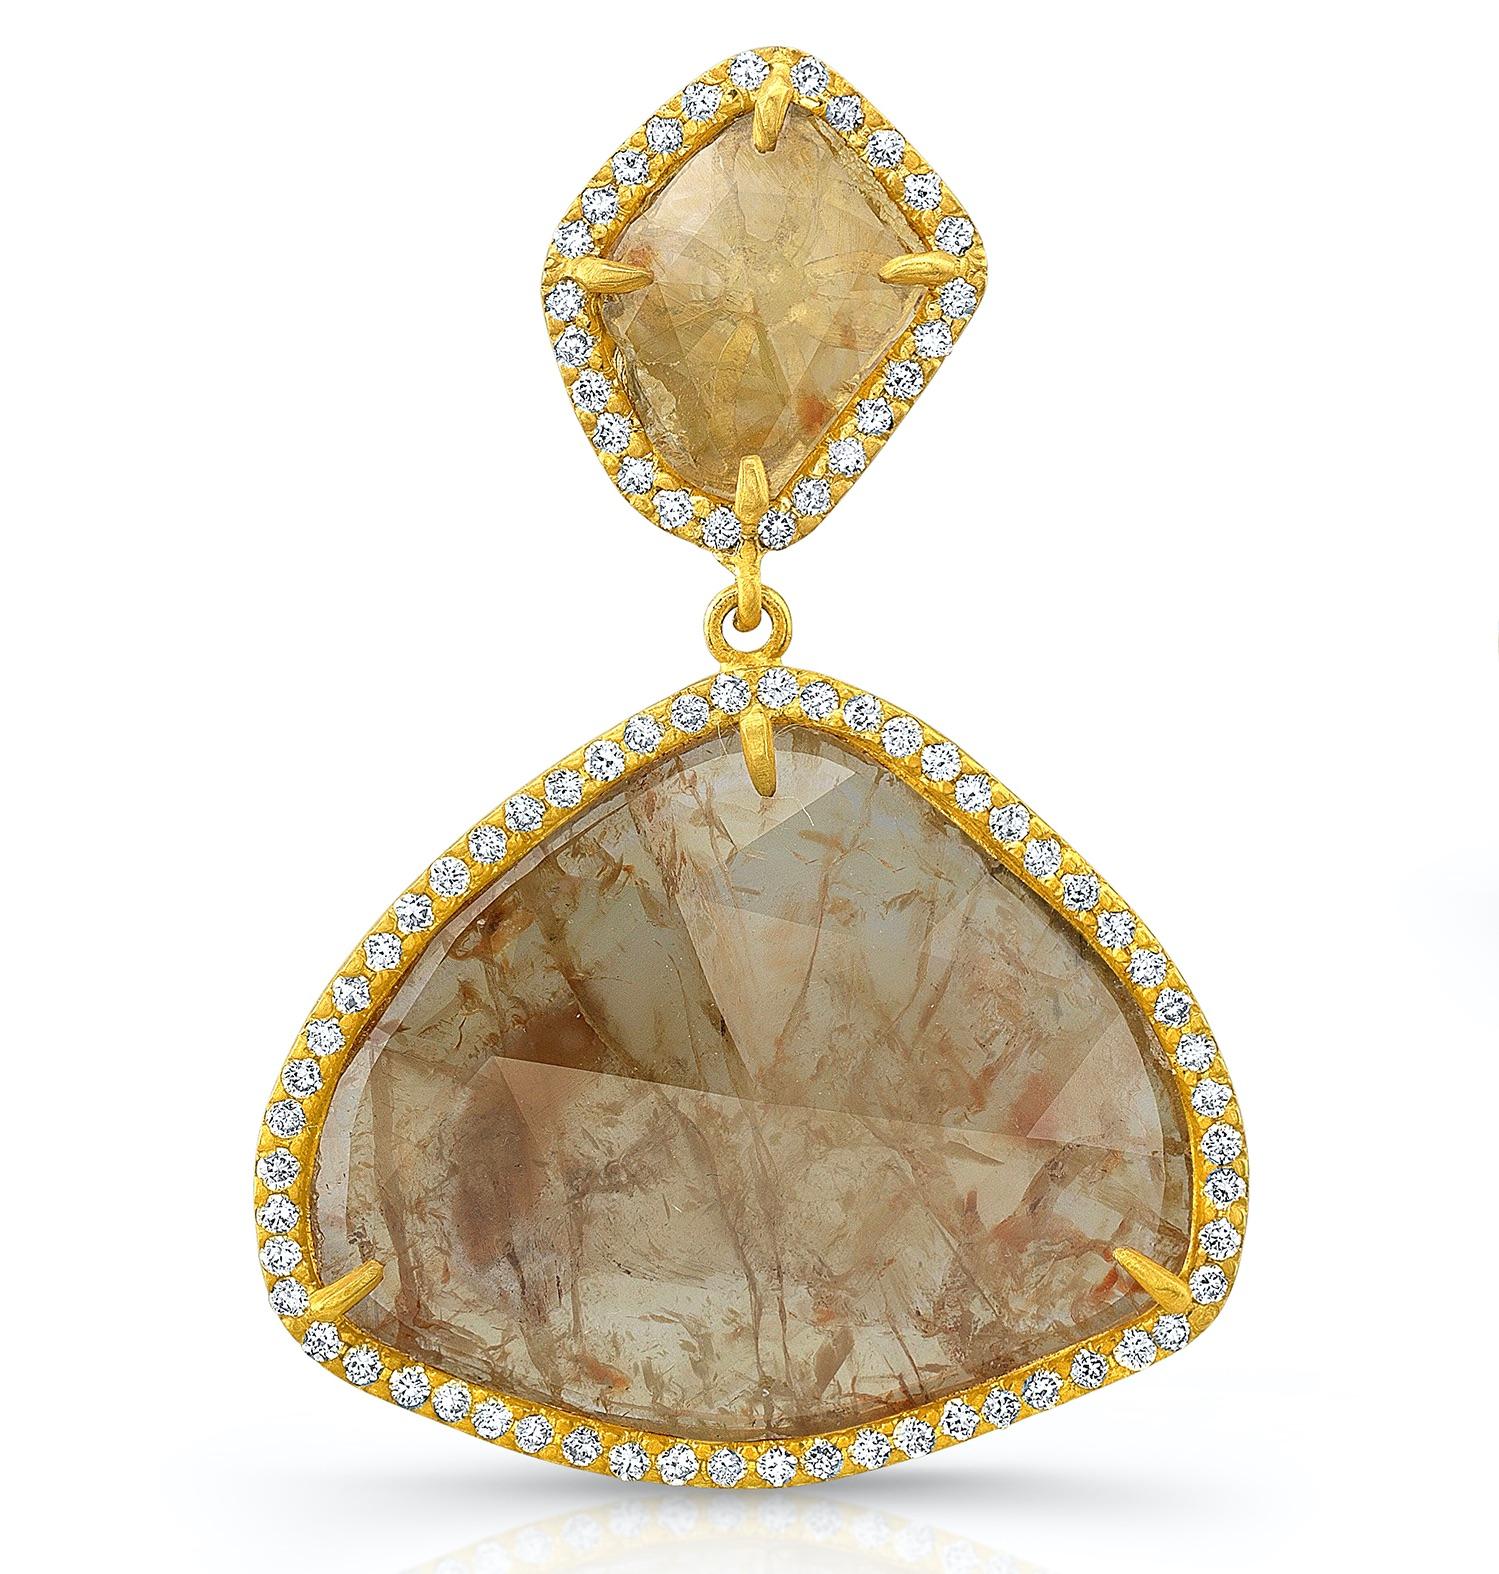 .92ct Delicate Yellow Diamond Slices with Large 8.49ct Honey “Marbled” Loosely faceted Diamond Slices Drop Earrings and .89ct Diamond Pave in 18k Matte Finish Yellow Gold Handmade in Los Angeles.  All Diamonds are ethically sourced.